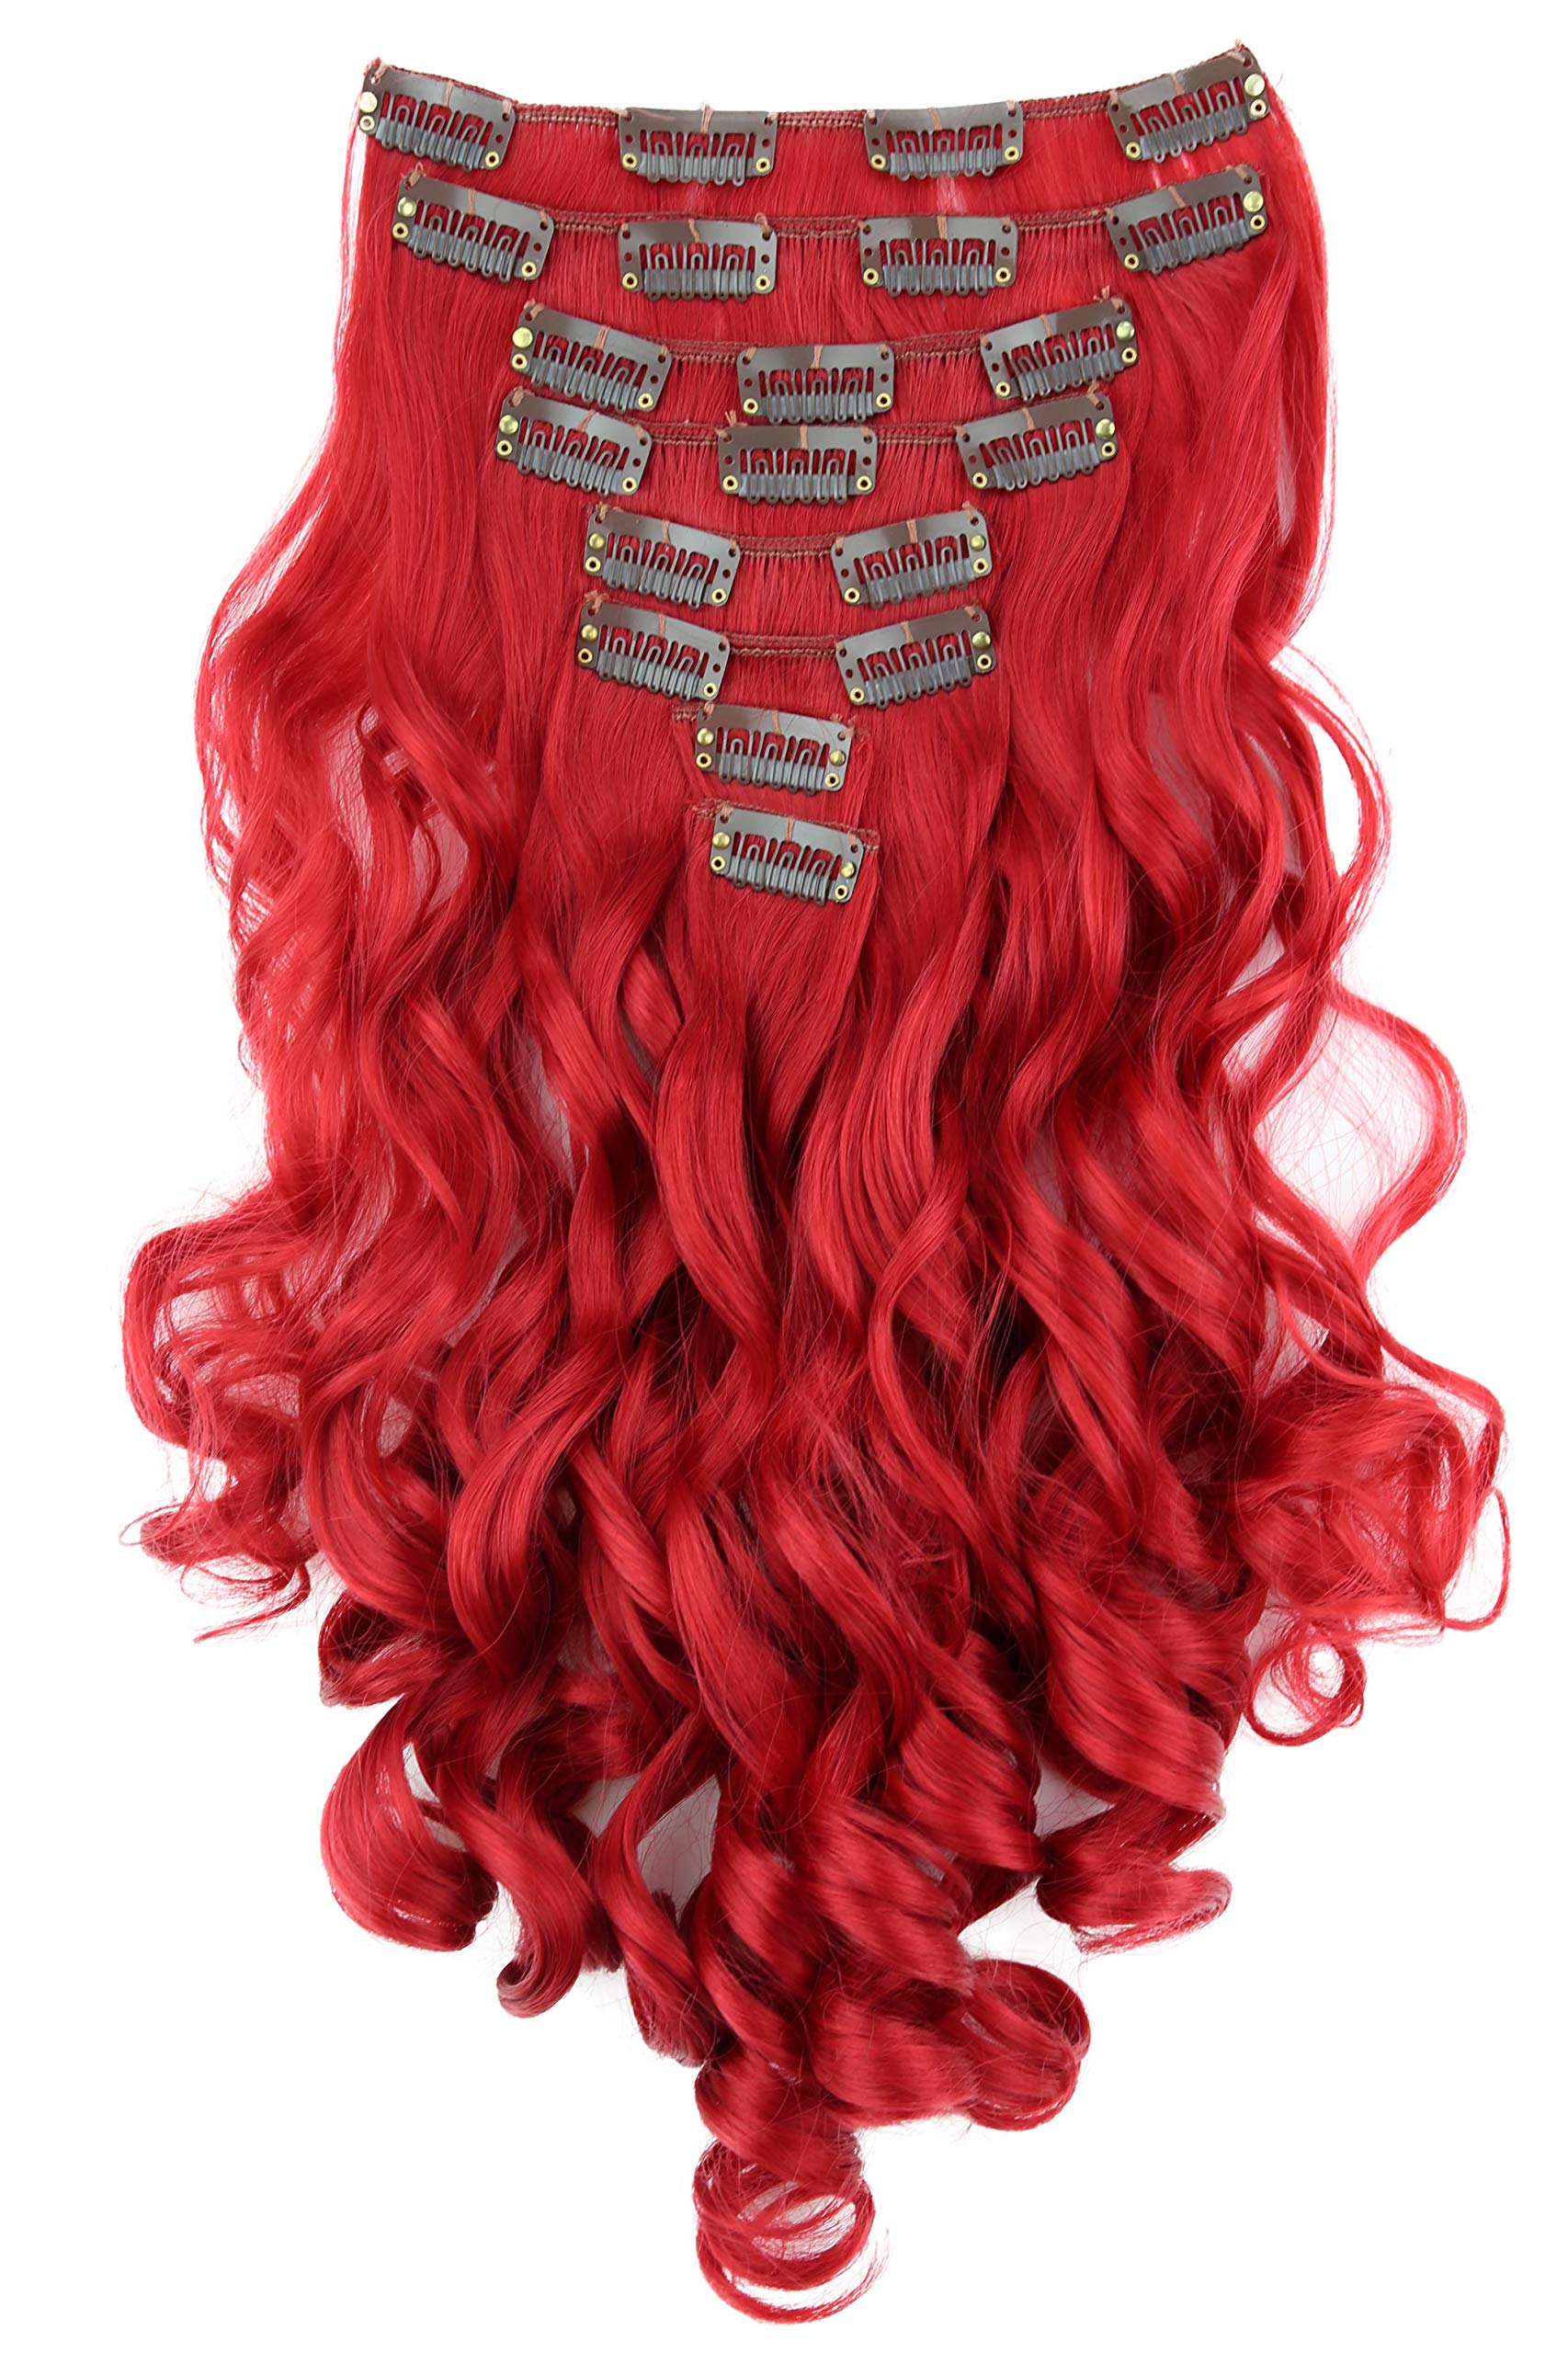 CAISHA by PRETTYSHOP XXL 18 8 Pieces Set Clip In Extensions Hair